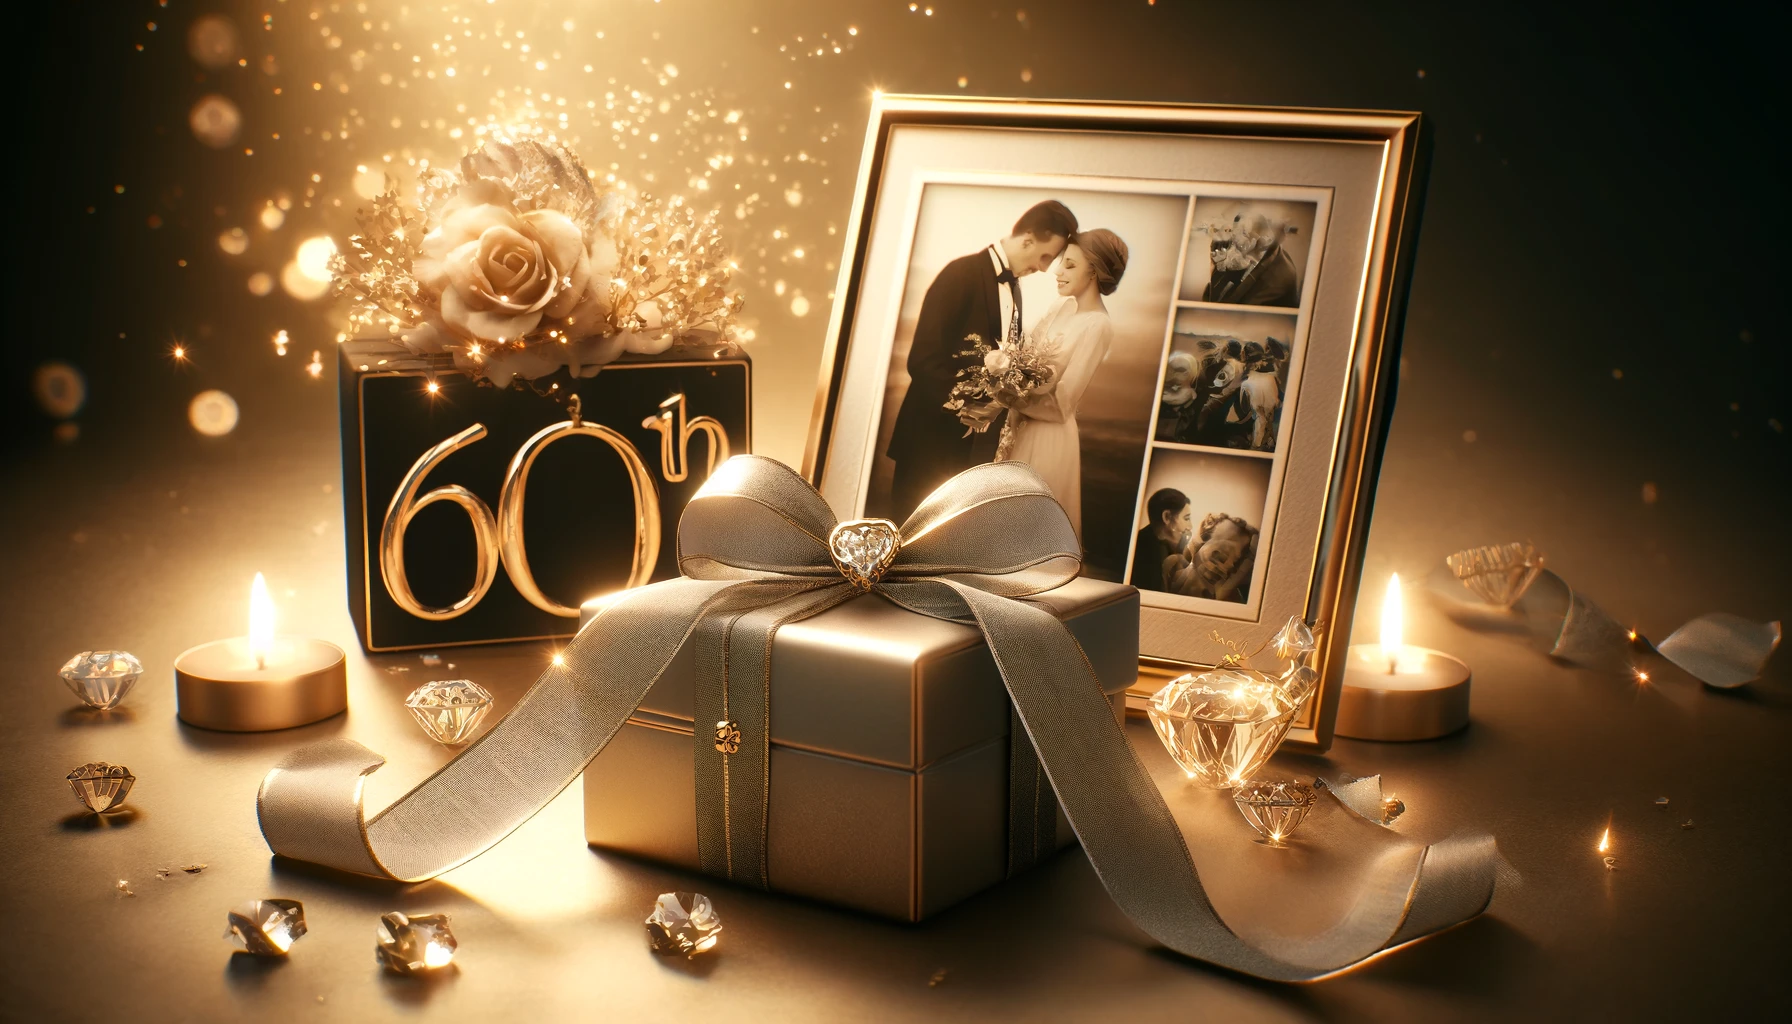 Gifts for Your 60th Wedding Anniversary